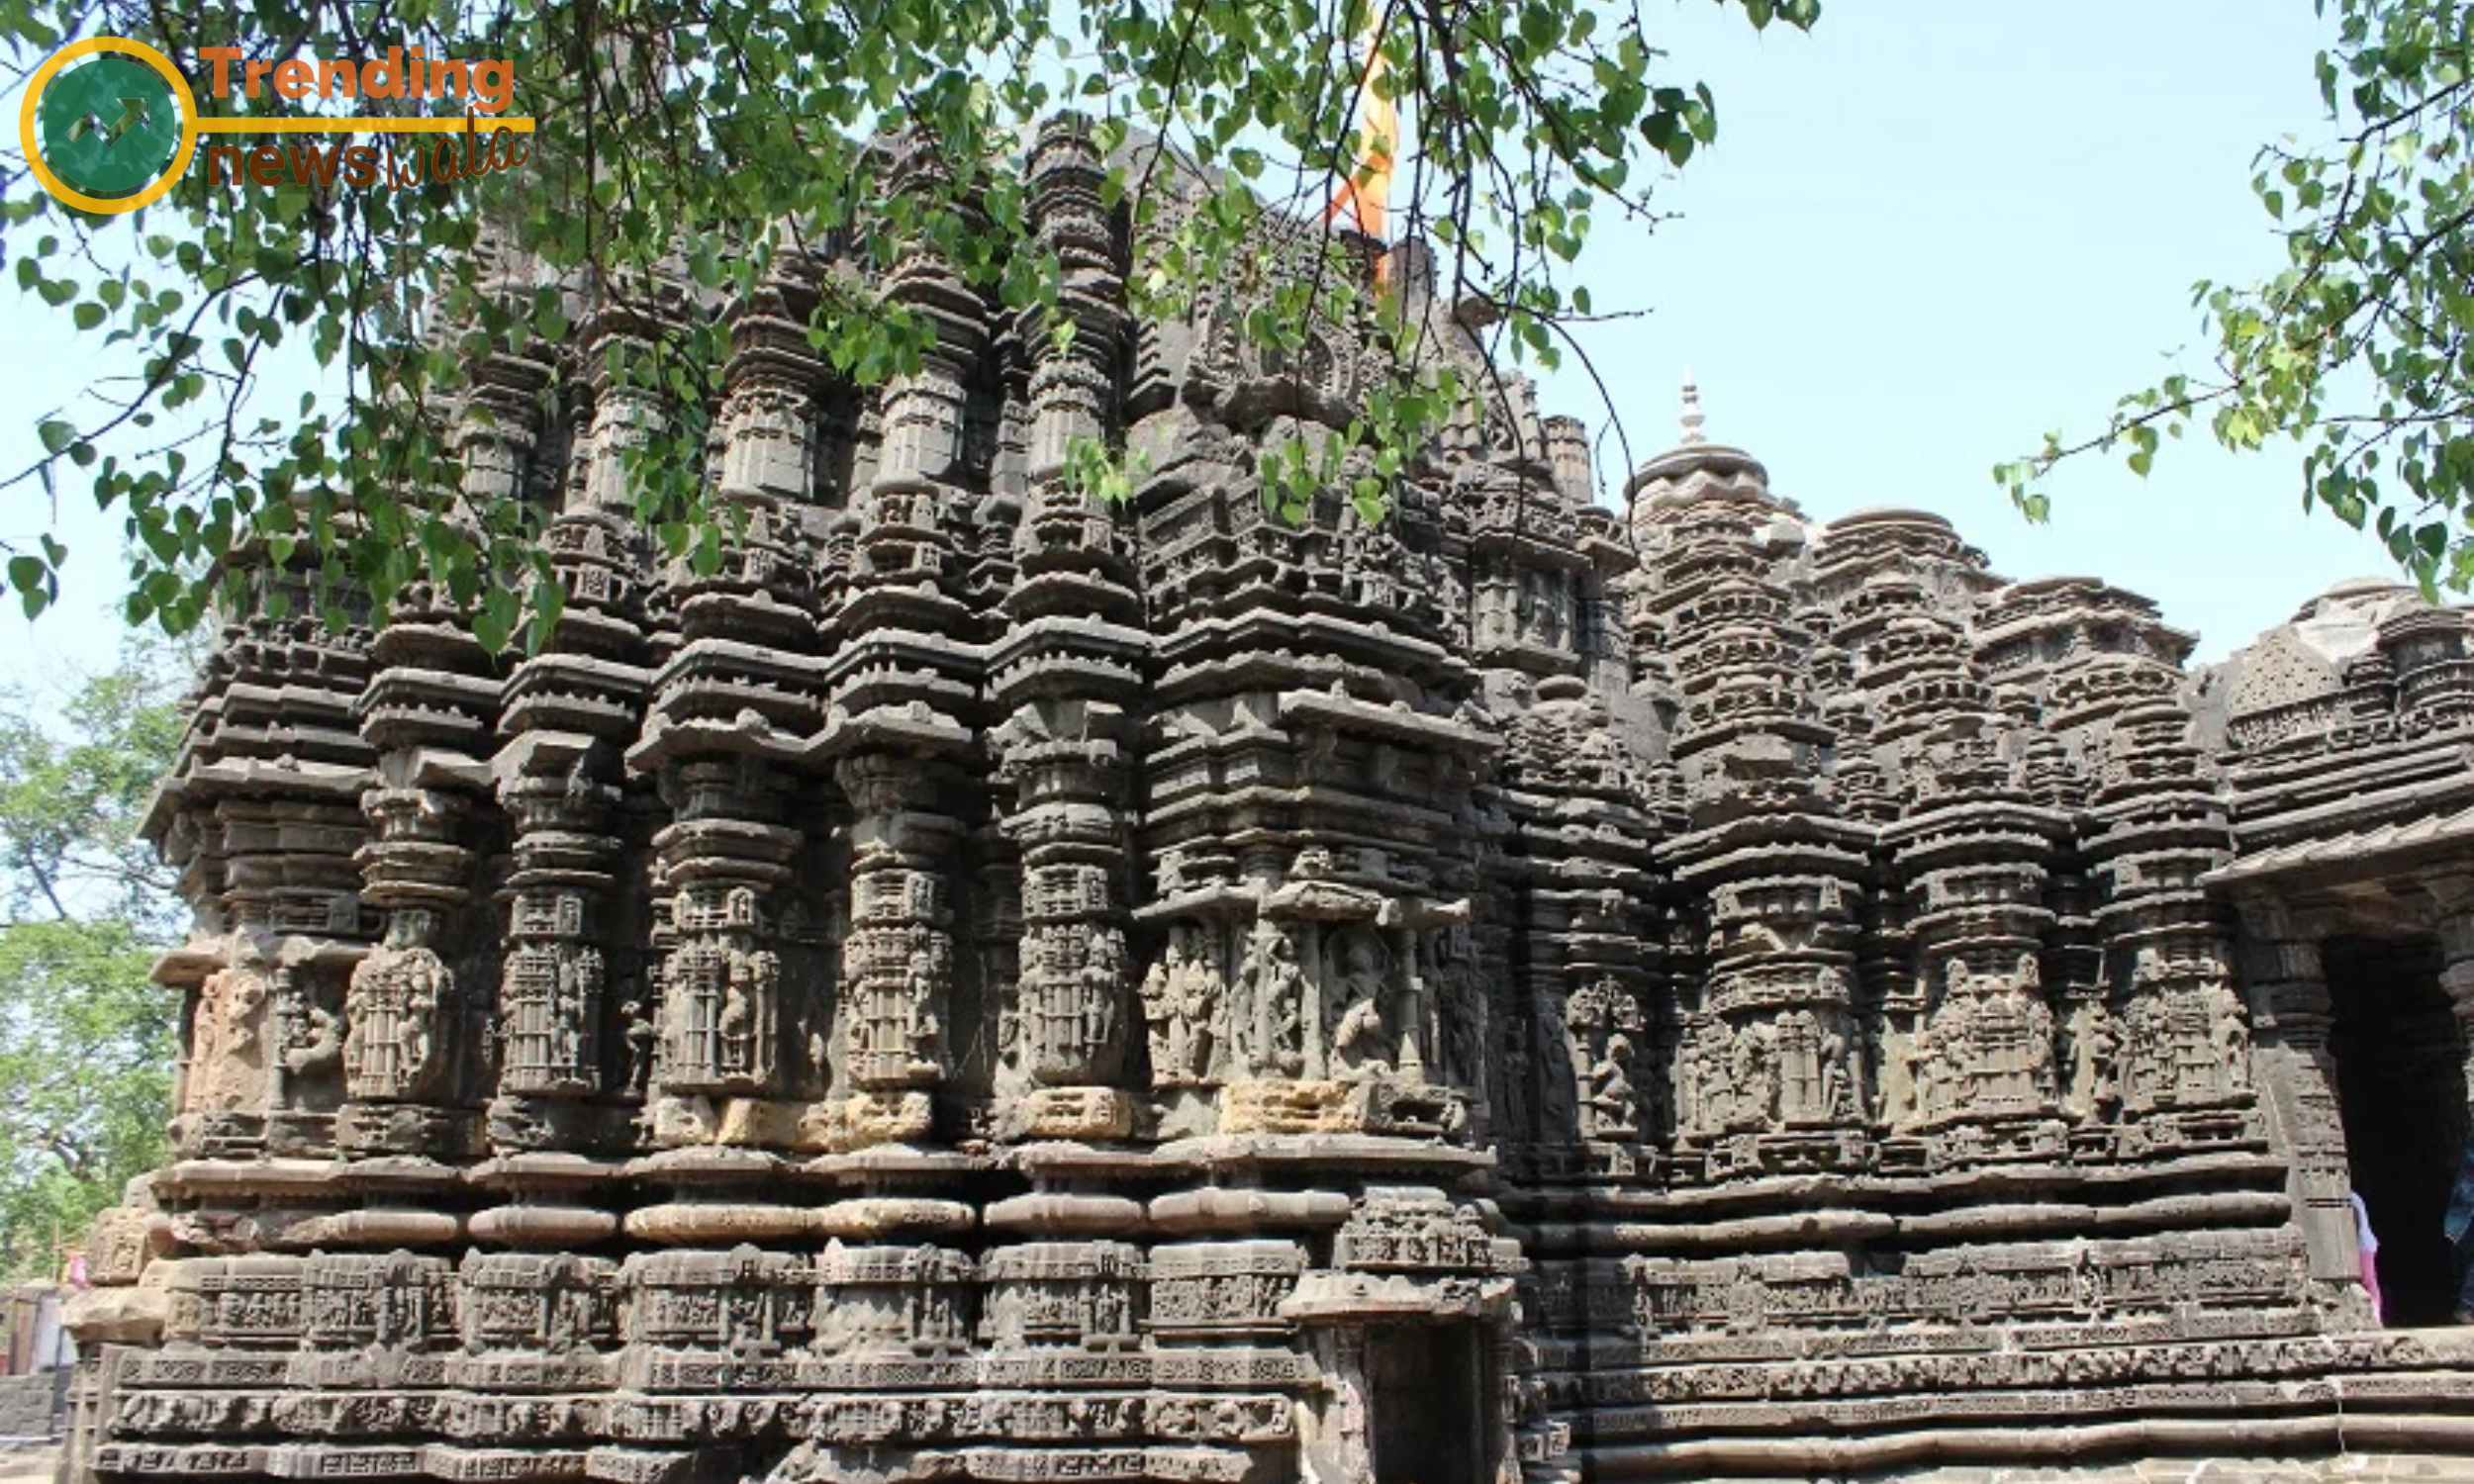 The Ambernath Shiva Temple holds archaeological significance